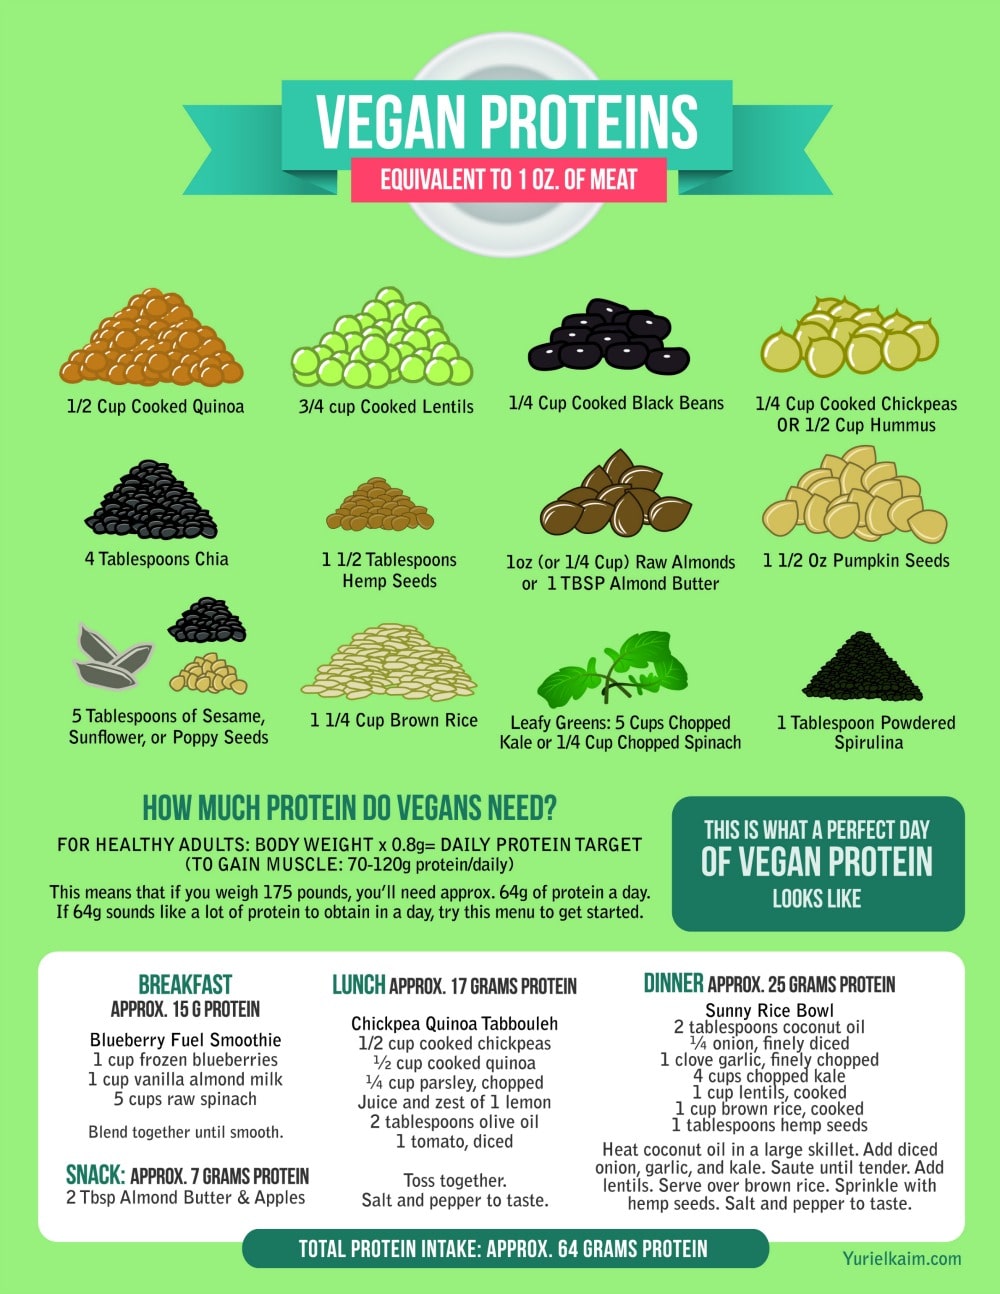 The Definitive Guide to the 12 Best Vegan Protein Sources | Yuri Elkaim